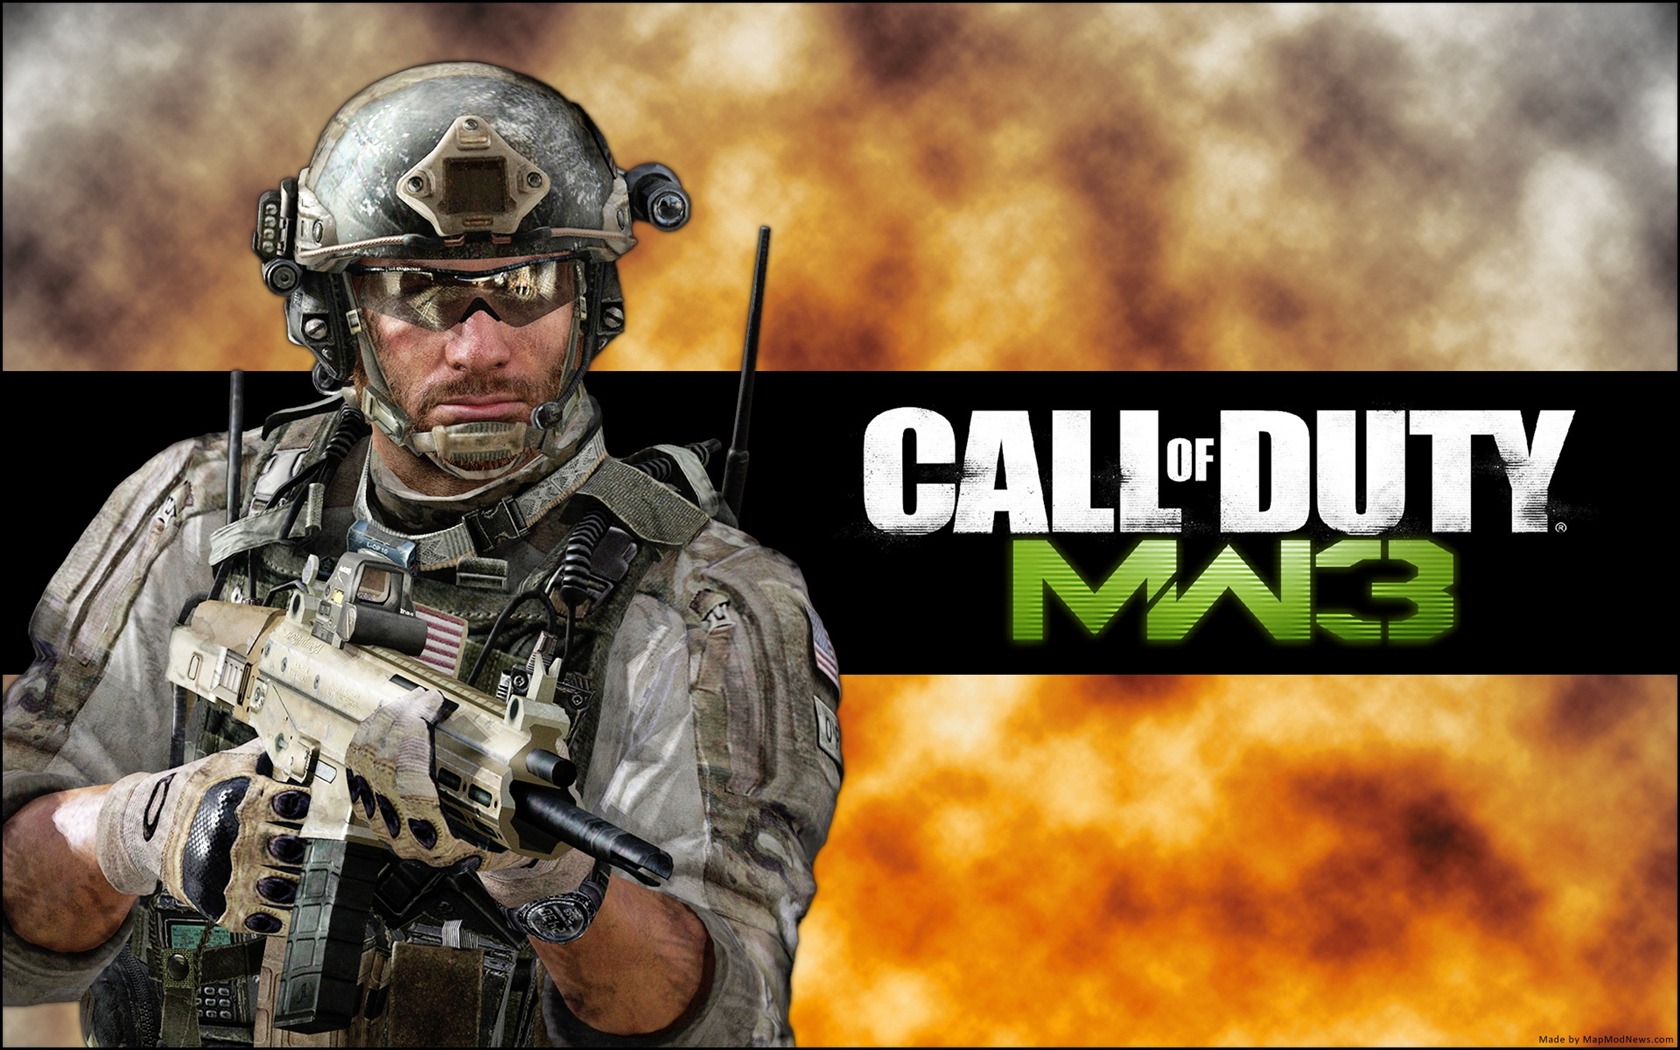 Call of Duty: MW3 wallpapers HD #14 - 1680x1050